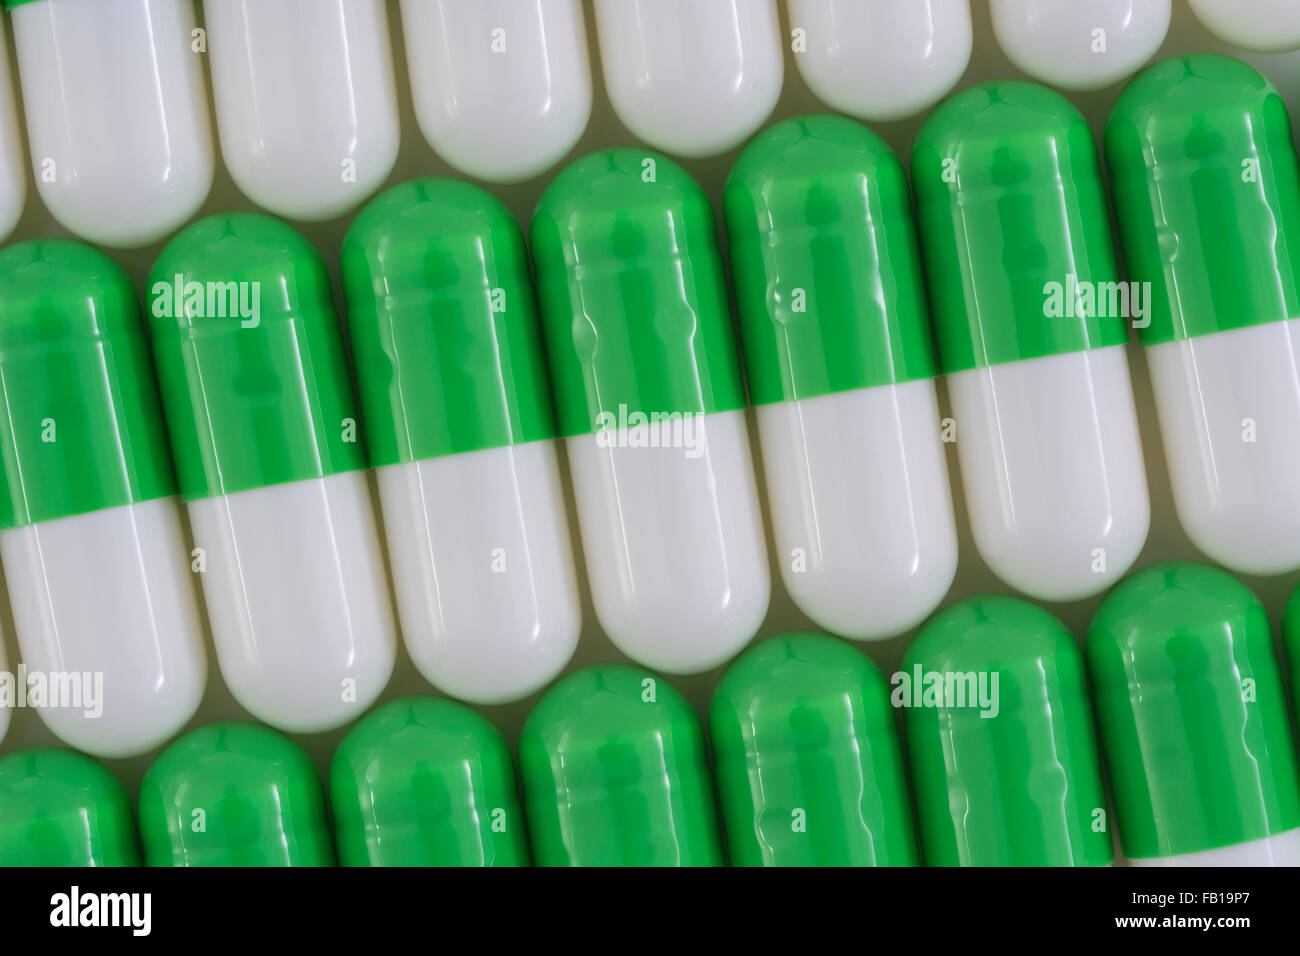 Close-up of pills - capsule form made of gelatin. Green / White pills. Metaphor taking on American drug companies over high drug prices, drug trials. Stock Photo